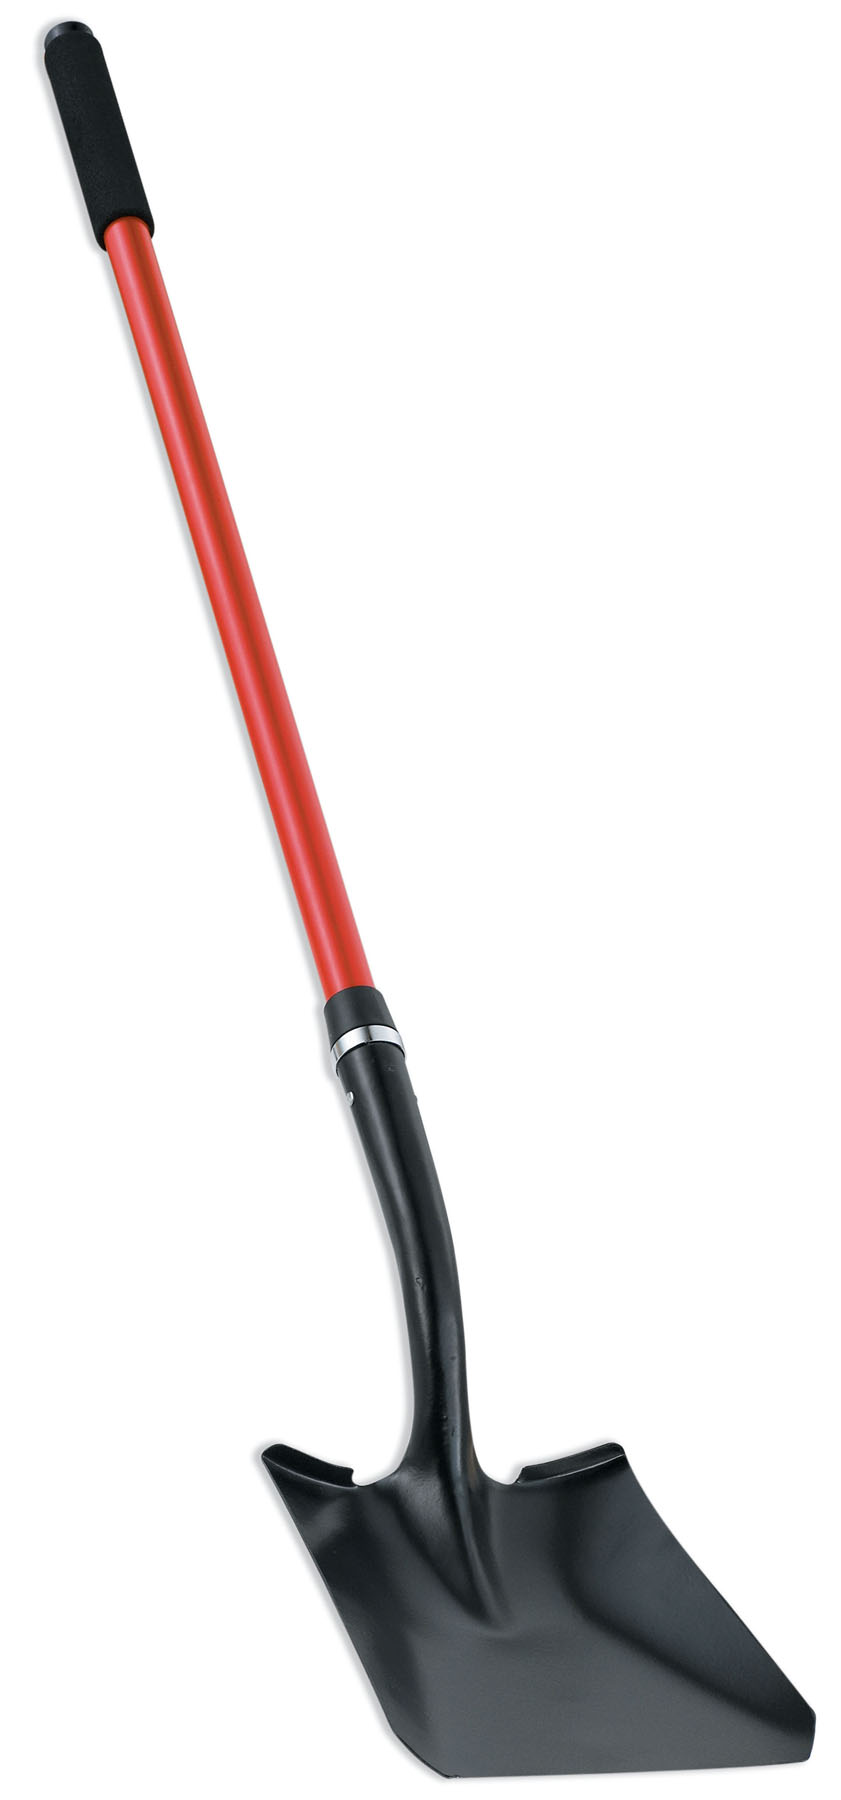 Corona SS31020 Hollow Back #2 Square Point Shovel With 48" Fiberglass Handle - image 1 of 1